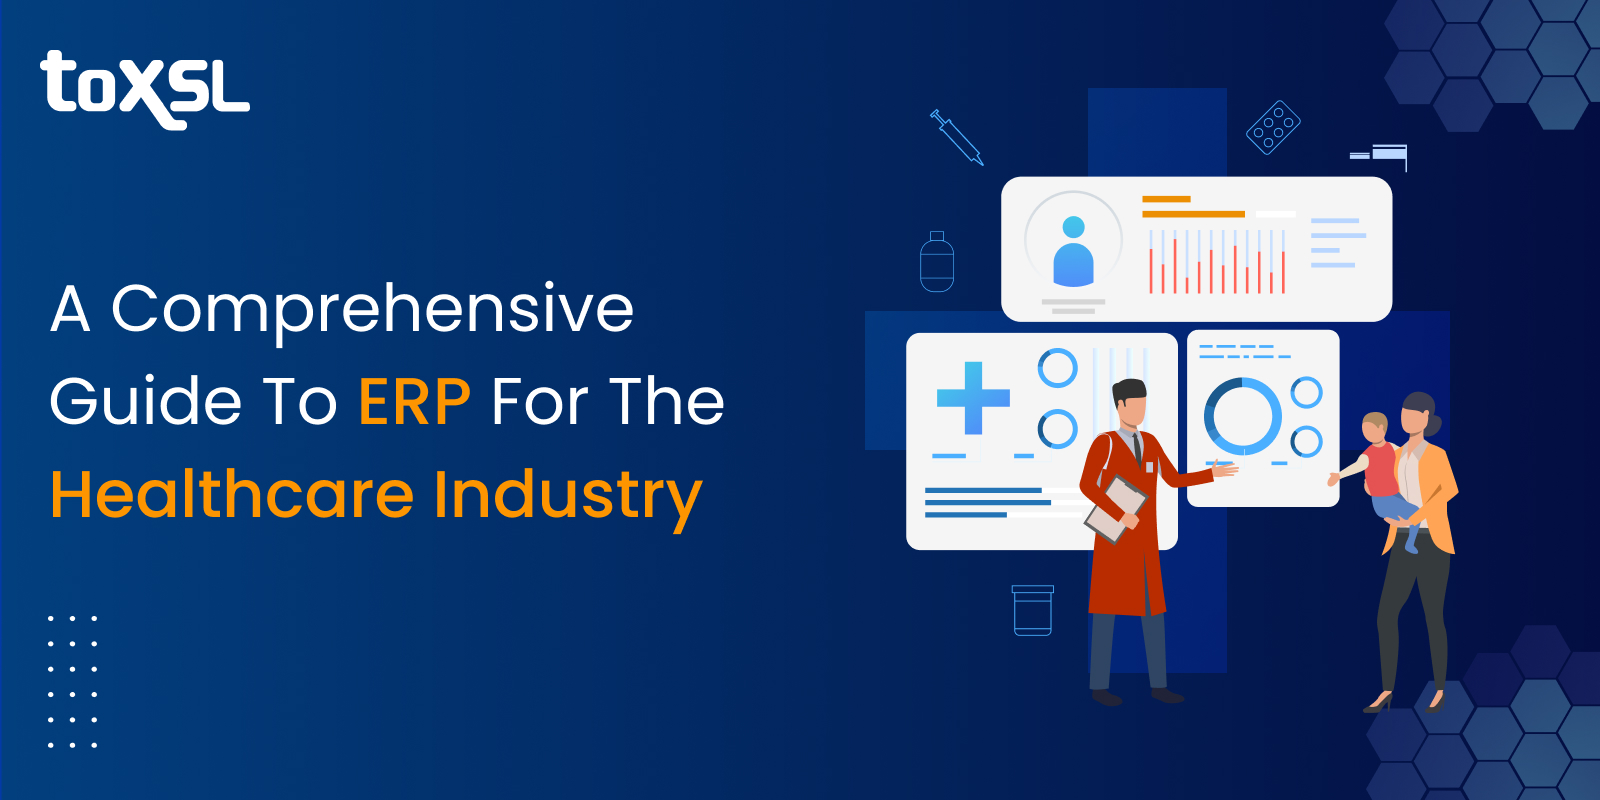 A Comprehensive Guide To ERP For The Healthcare Industry